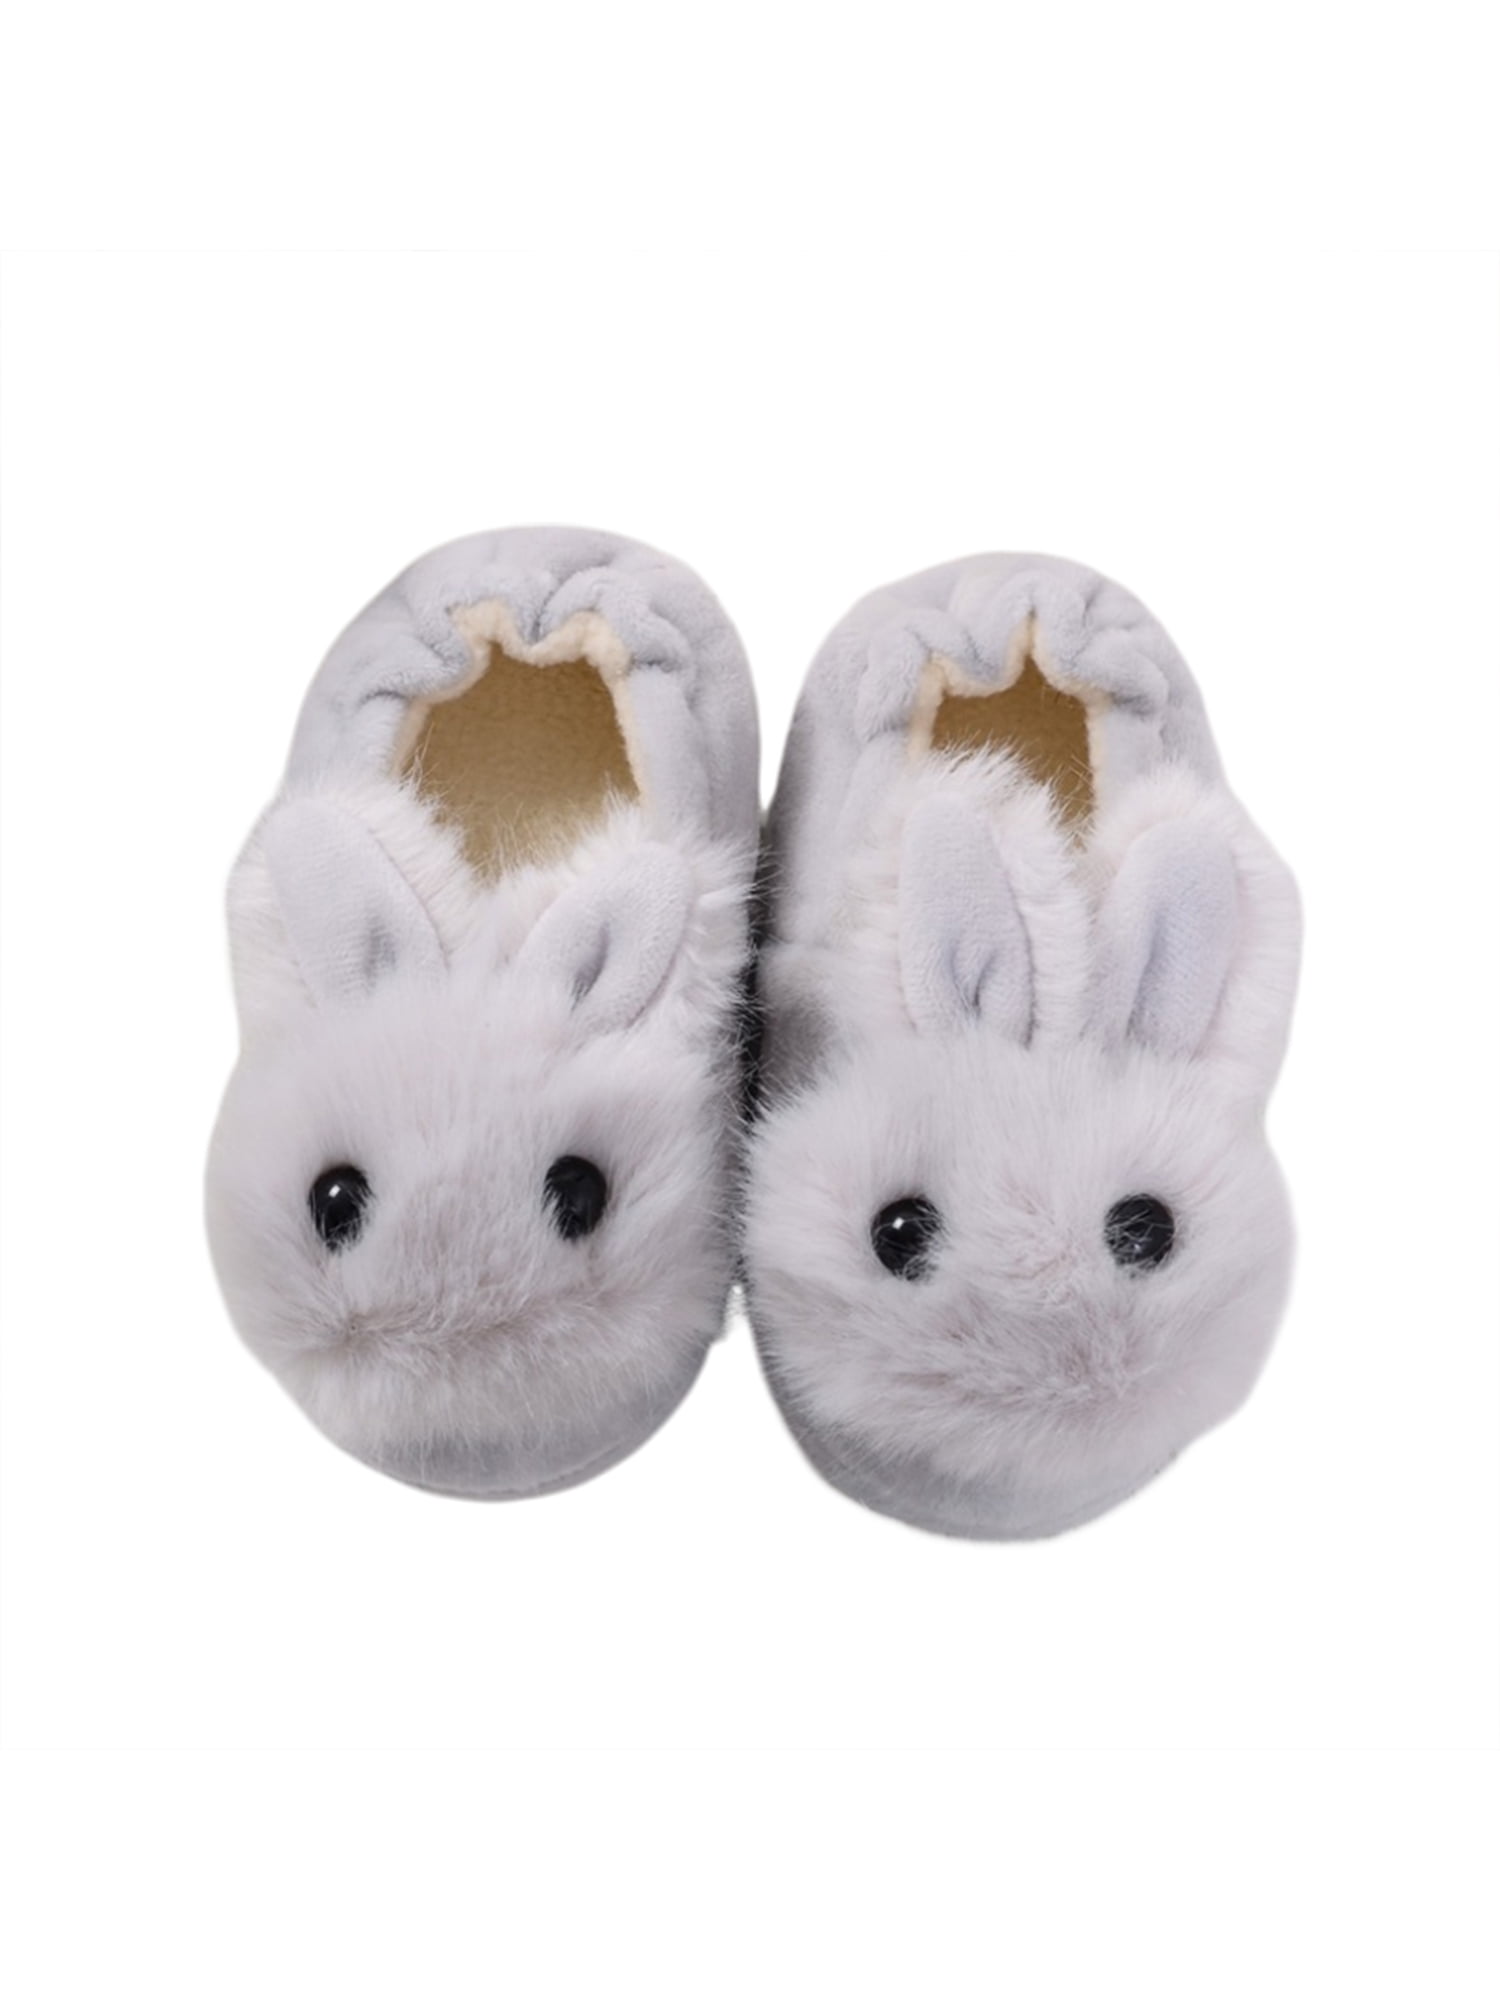 Dsood Boys Girls House Slippers Fuzzy Indoor Shoes for Toddler Kids Baby Rubber Walking Slippers Crib Shoes Infant/Toddler 